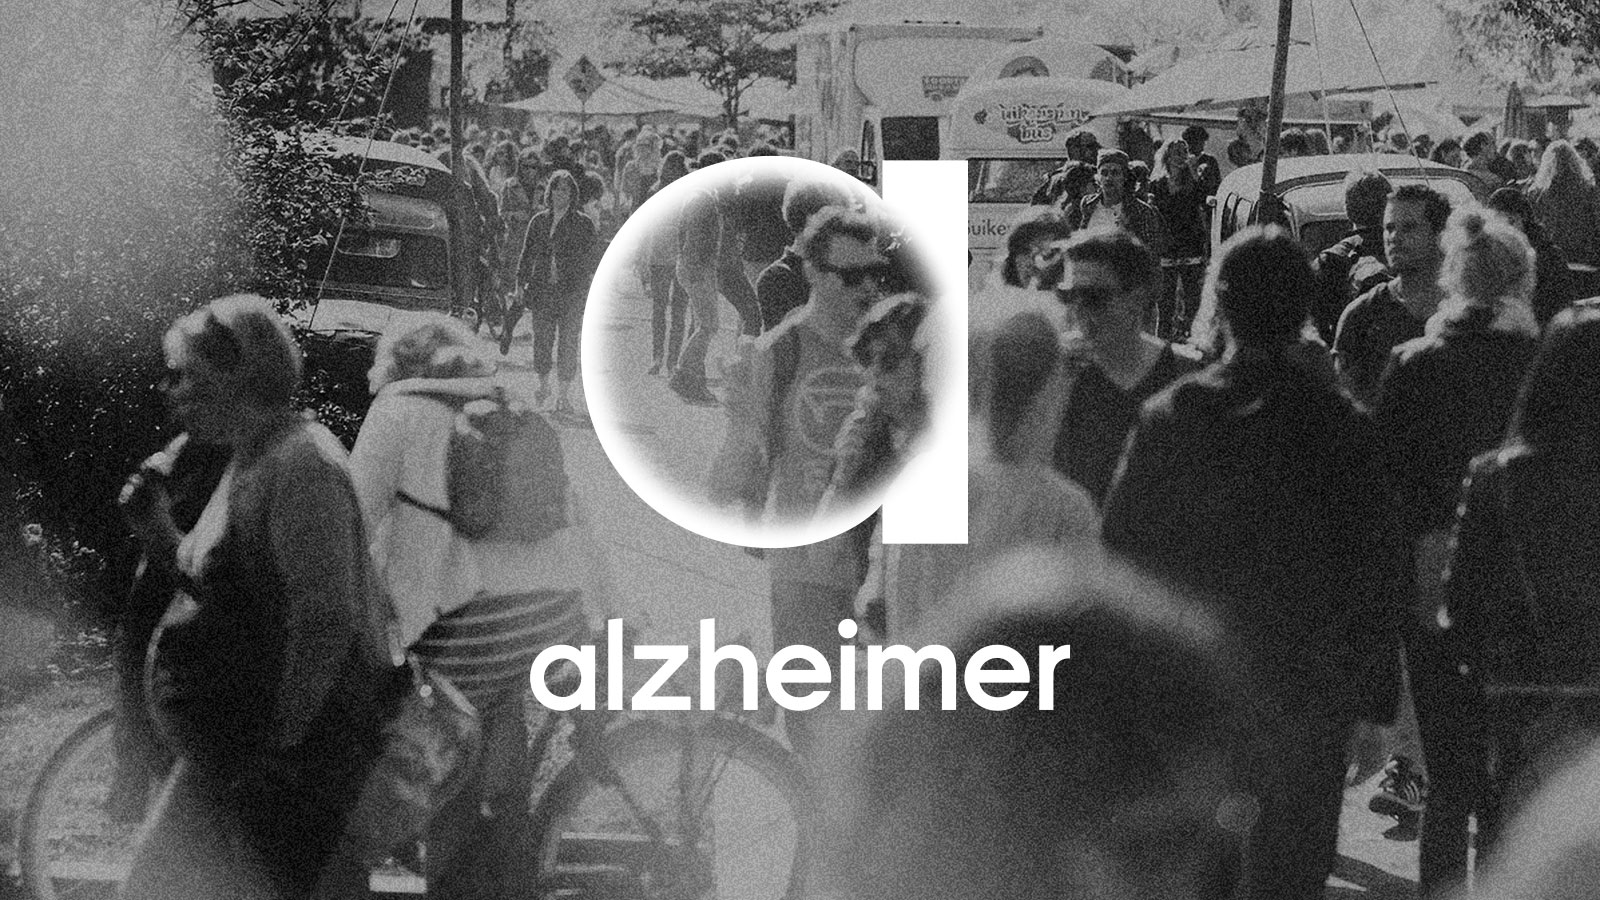 The Alzheimers Event